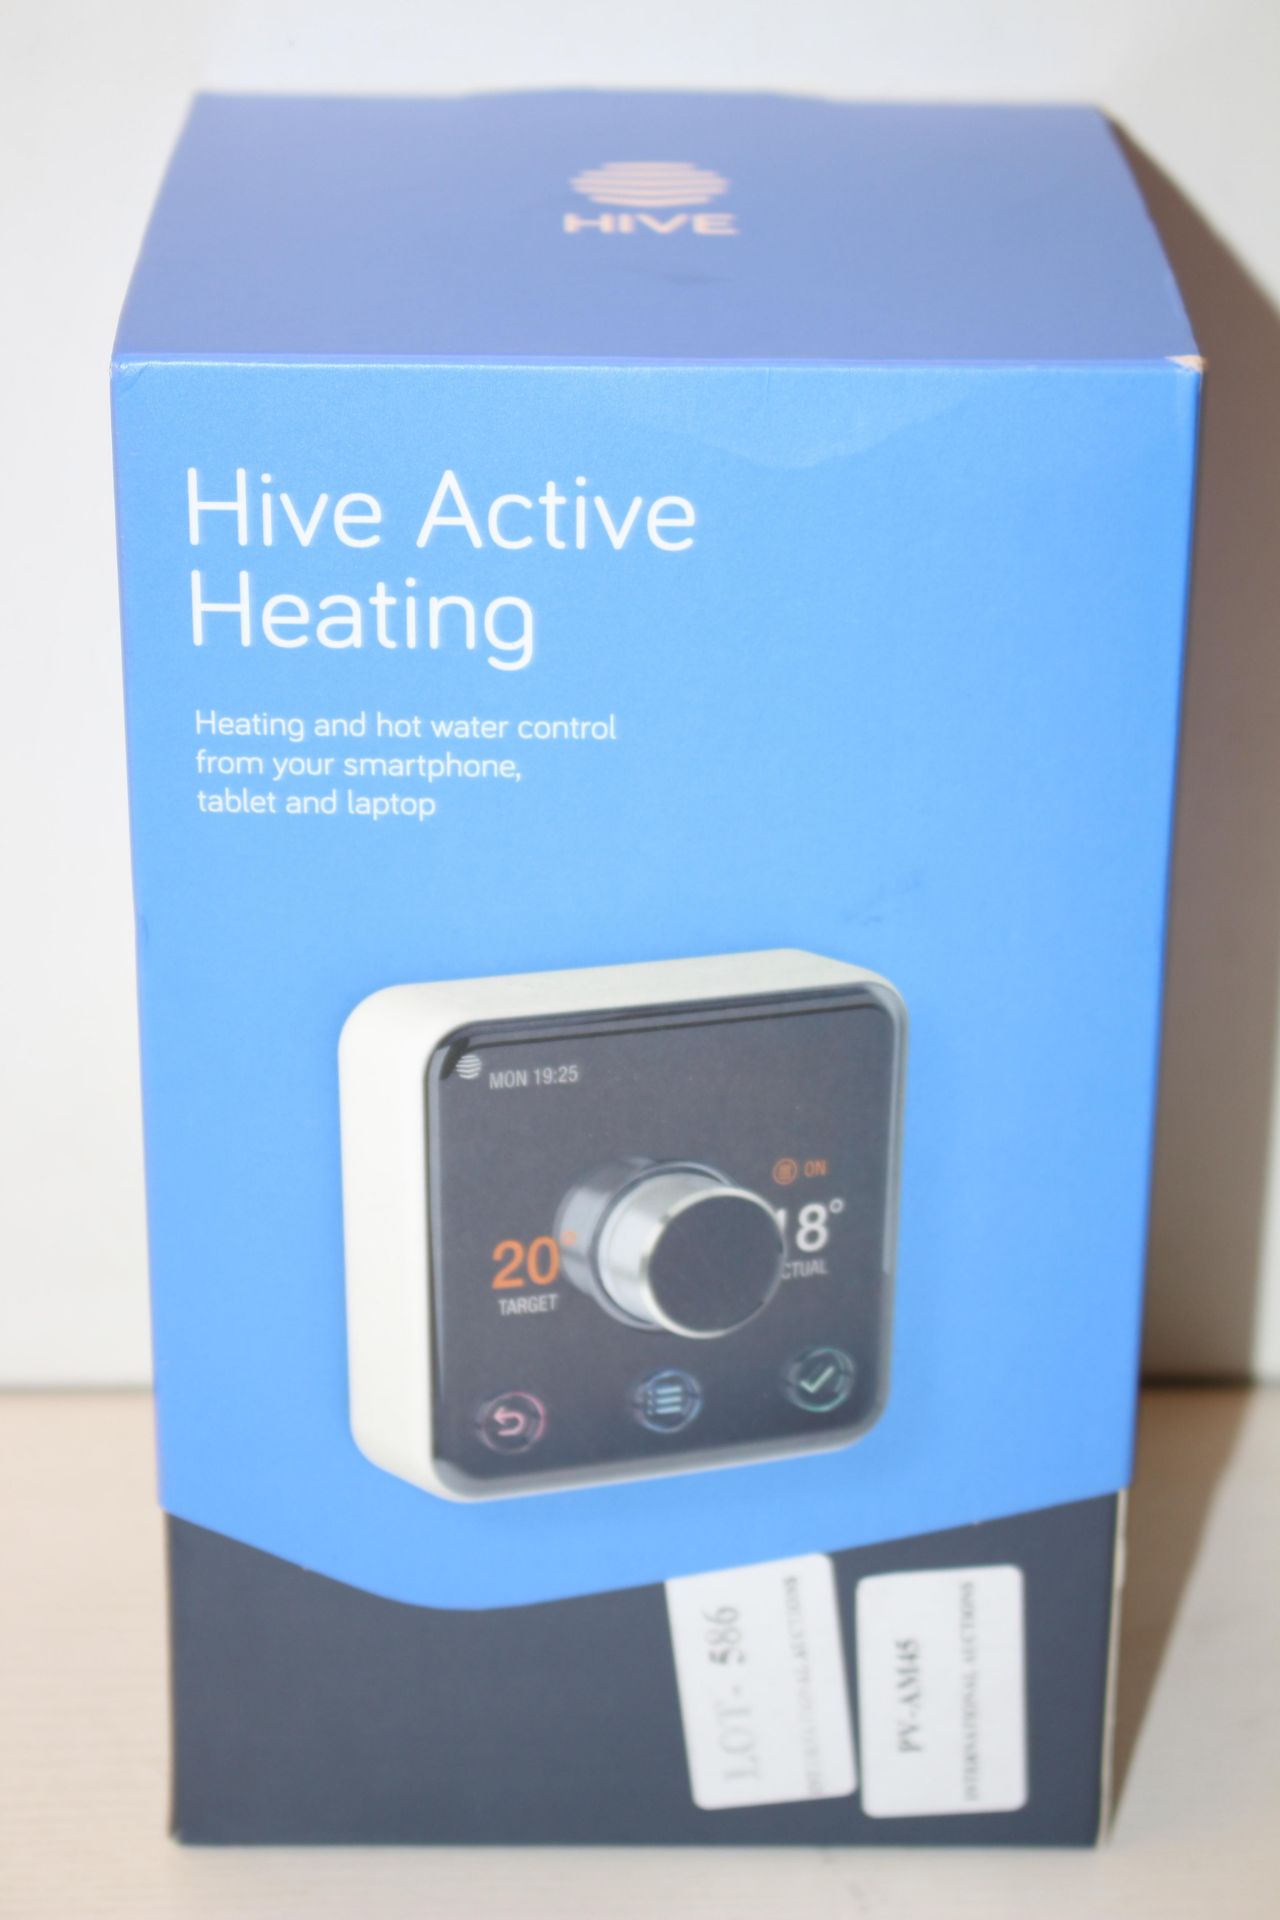 BOXED HIVE ACTIVE HEATING SET TO INCLUDE HUB, THERMOSTAT AND RECIEVER RRP £179.94Condition